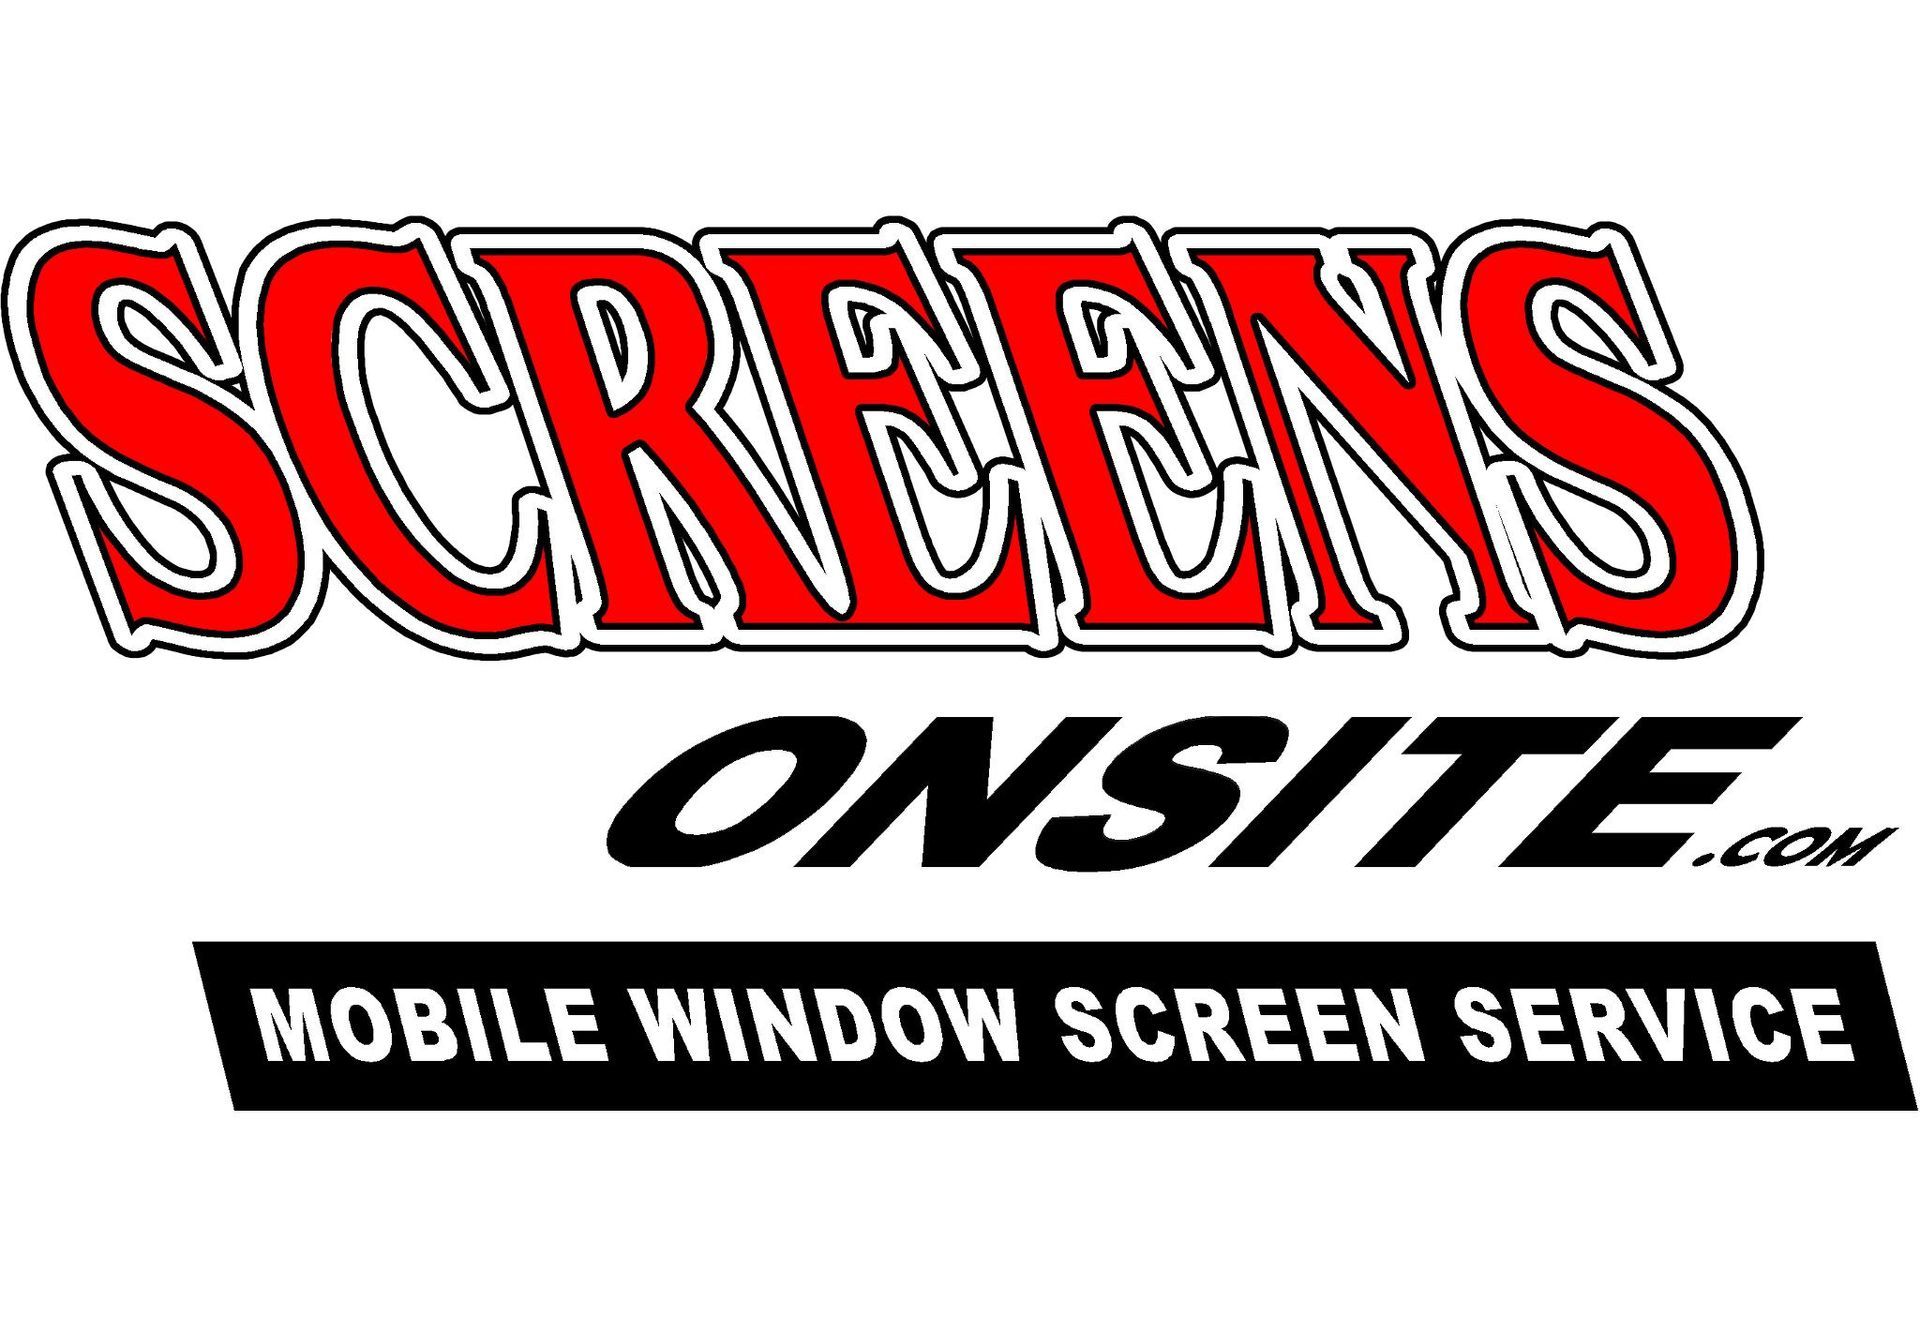 A logo for screens onsite , a mobile window screen service.